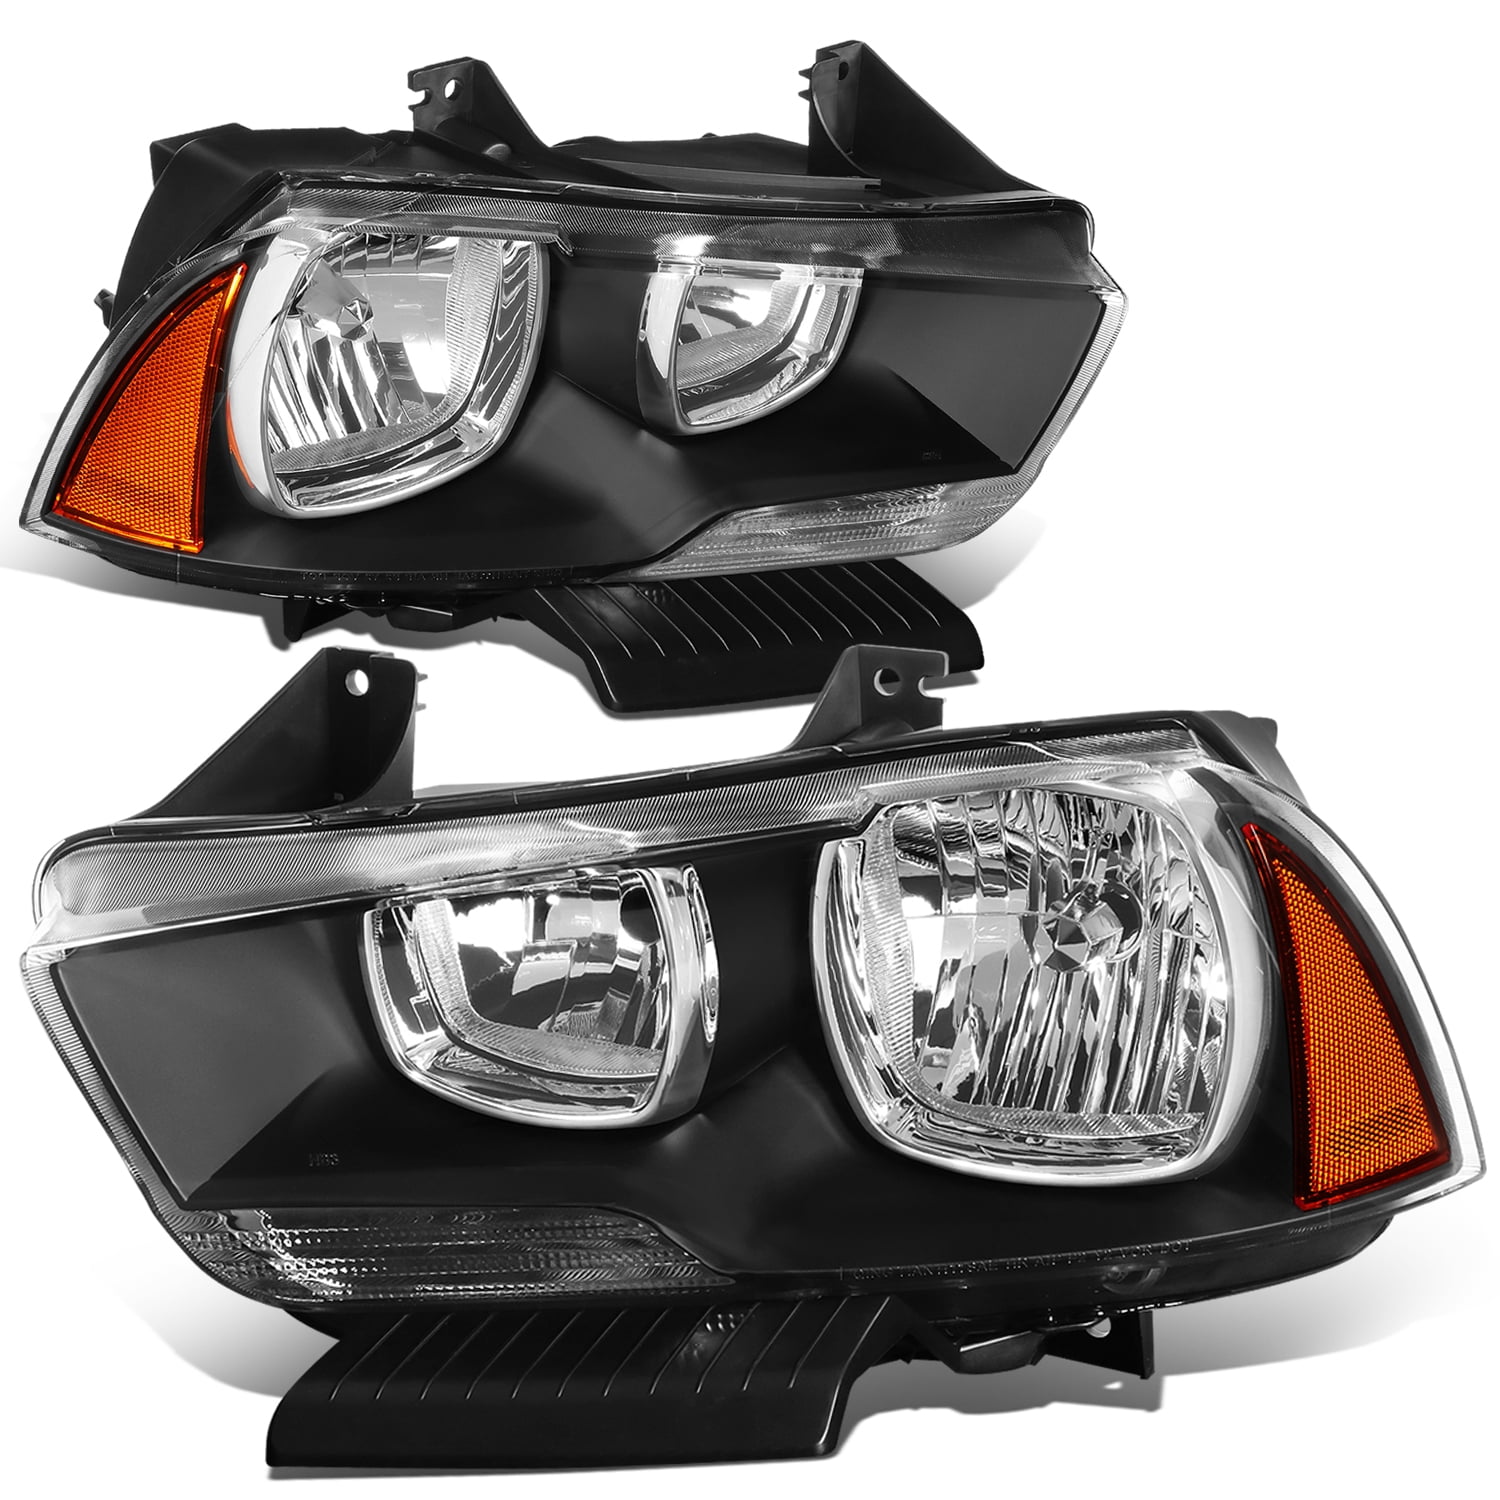 Headlight Assembly - DEPO Compatible/Replacement for '16-17 Kia